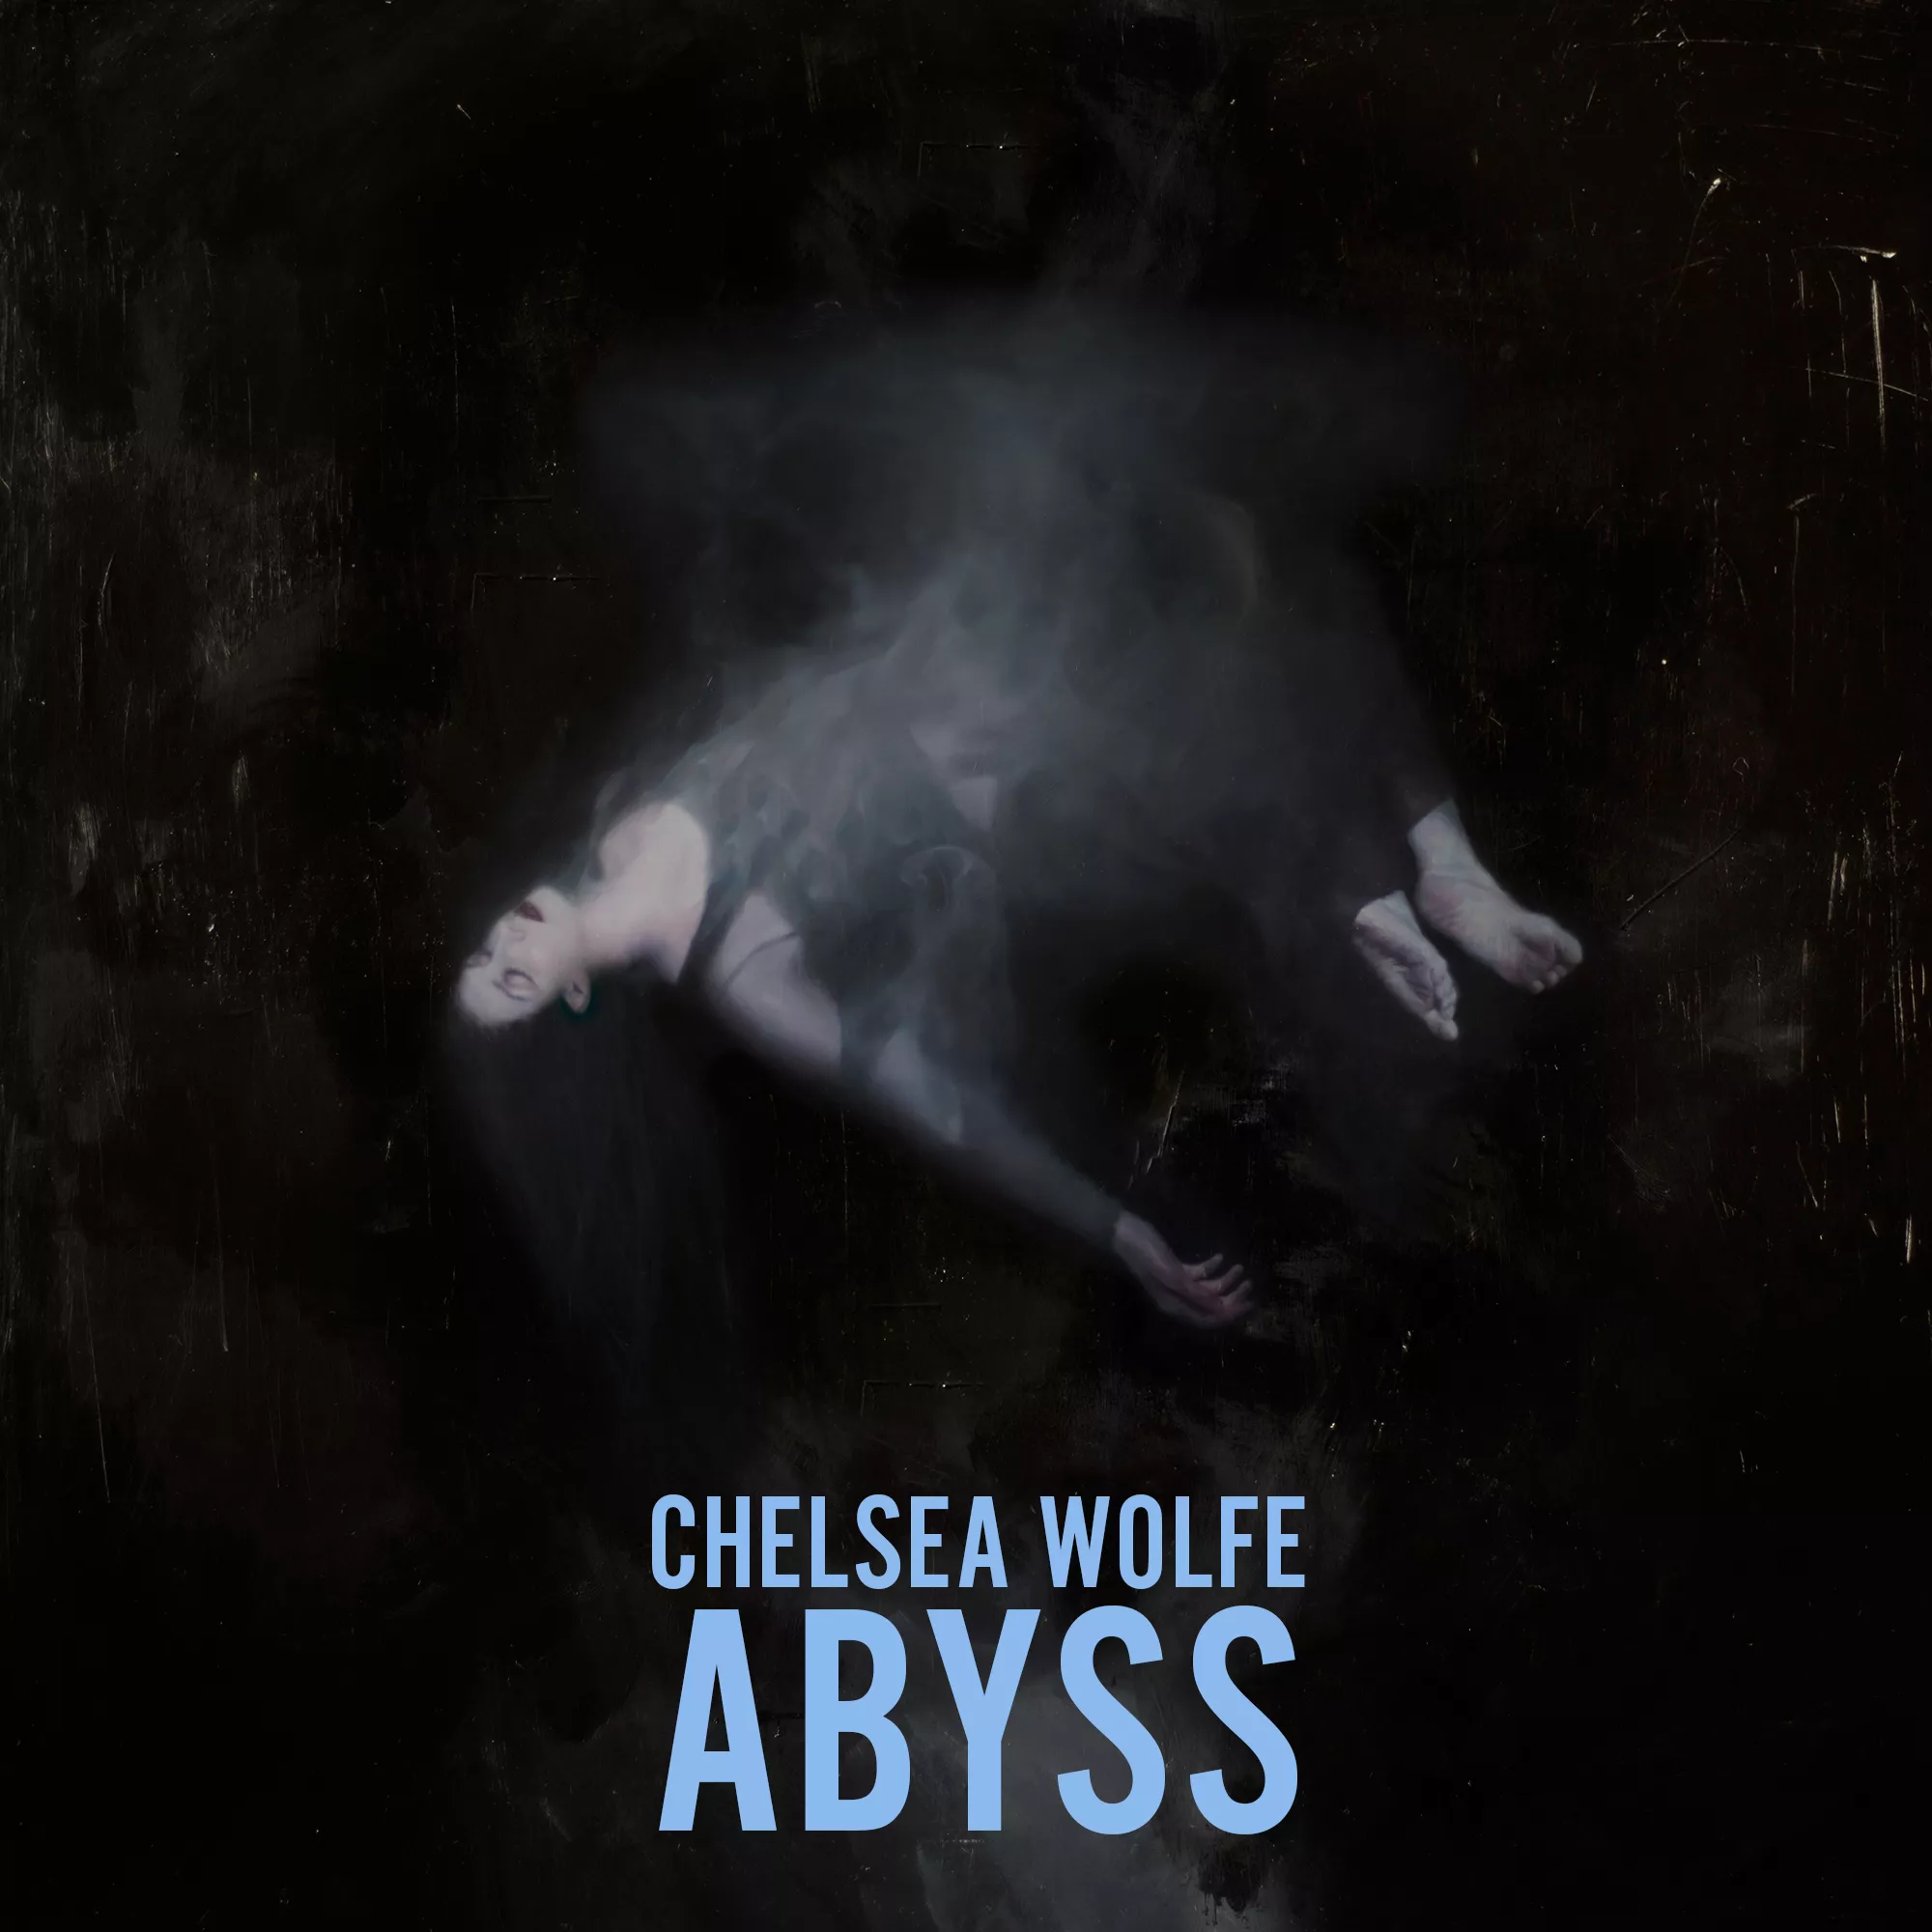 Abyss - Chelsea Wolfe